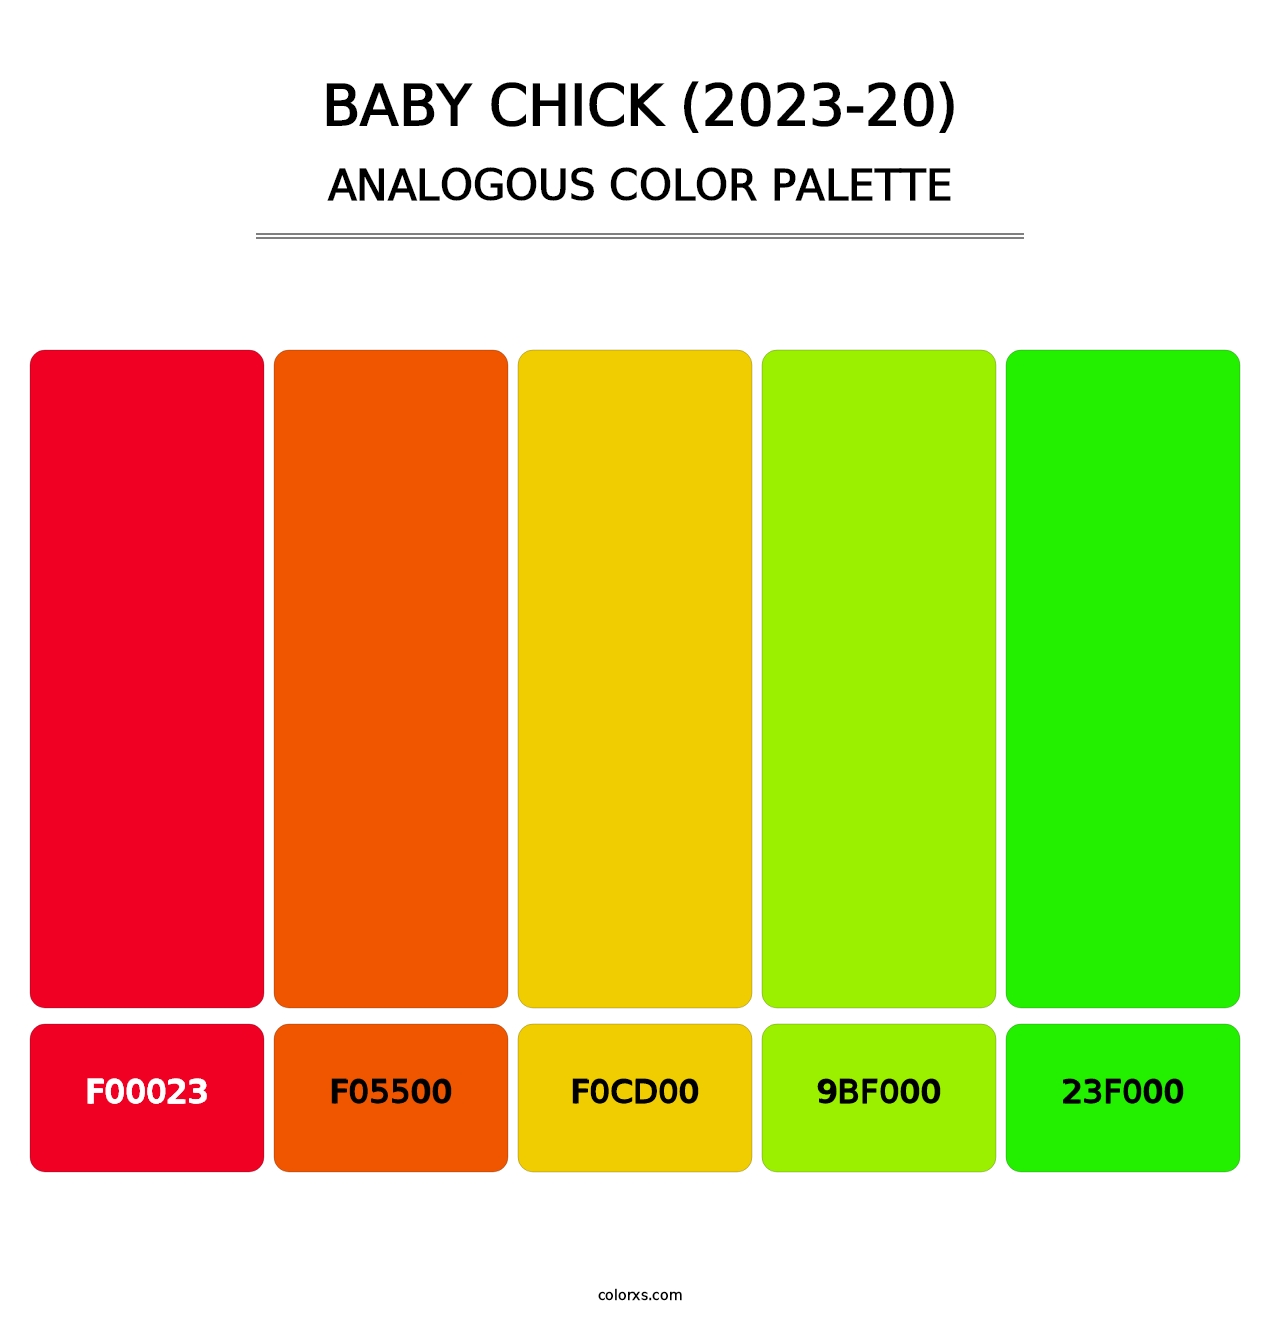 Baby Chick (2023-20) - Analogous Color Palette